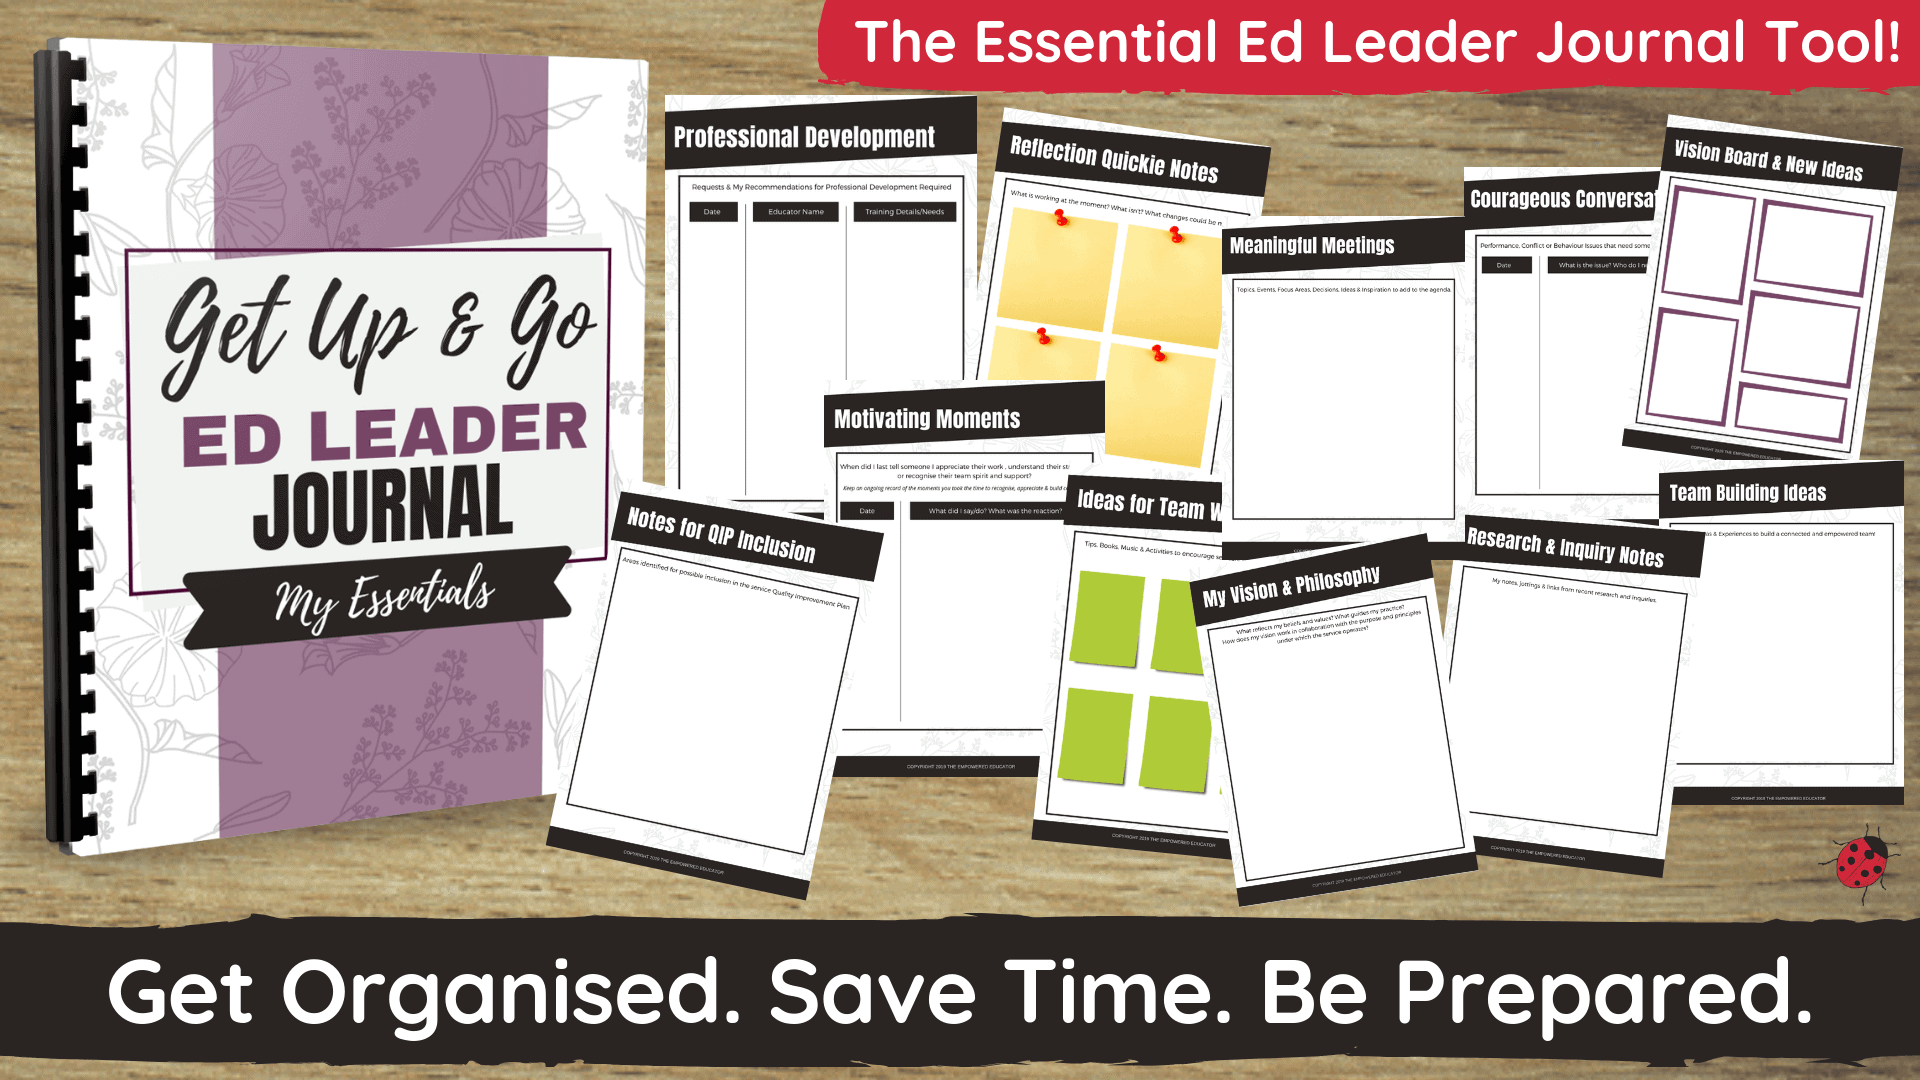 Educational leaders - use this journal to help you lead confidently, mentor, motivate, inspire, manage your time effectively & simplify your role!